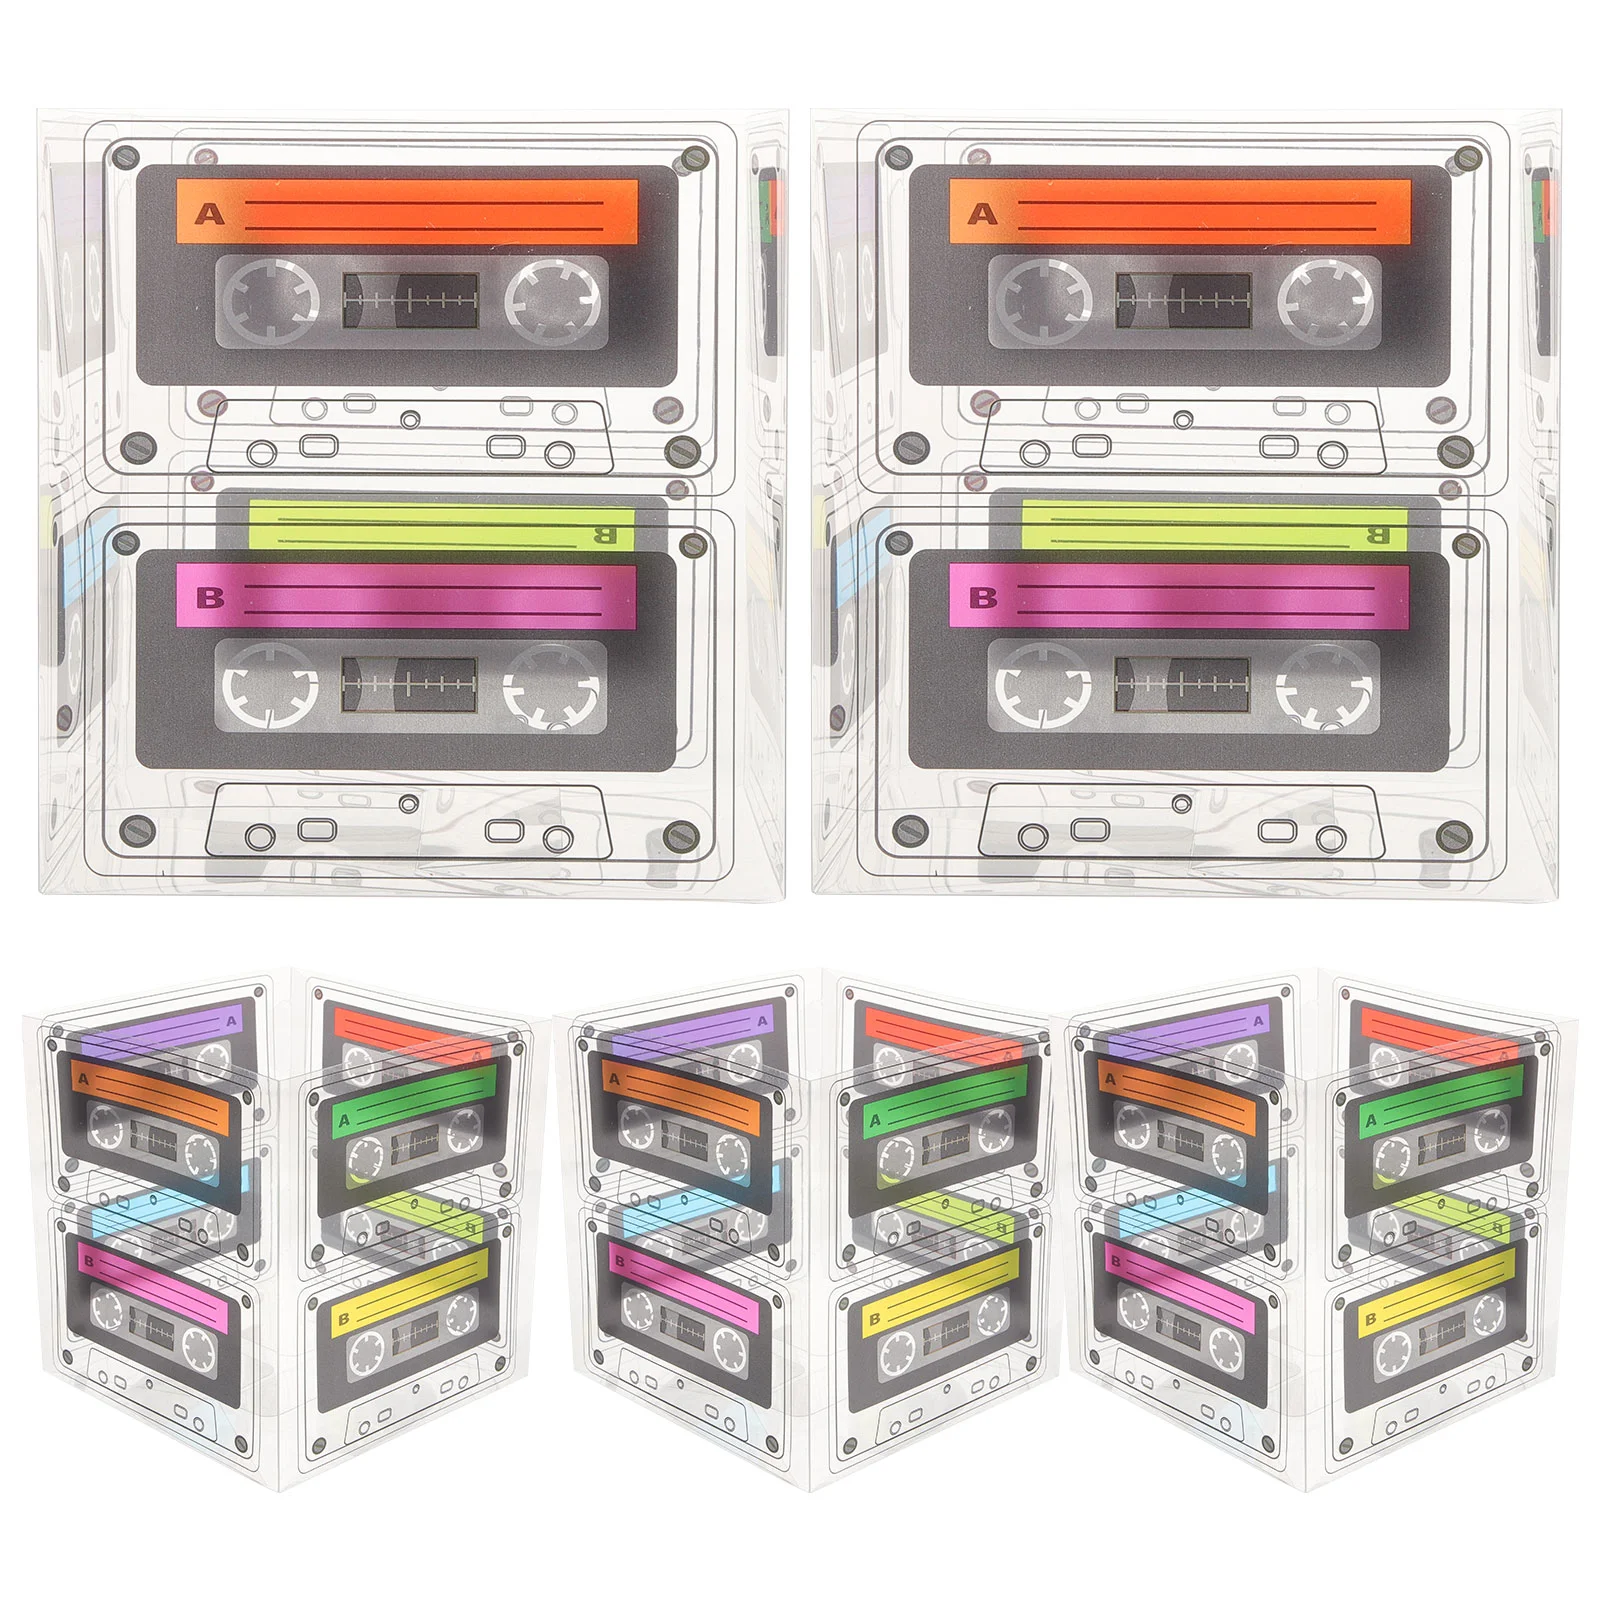 

5 Pcs The Gift Cassette Tape Bucket 80s Party Decor Present Bags Ribbon Vintage Packing Cases Plastic Table Candy